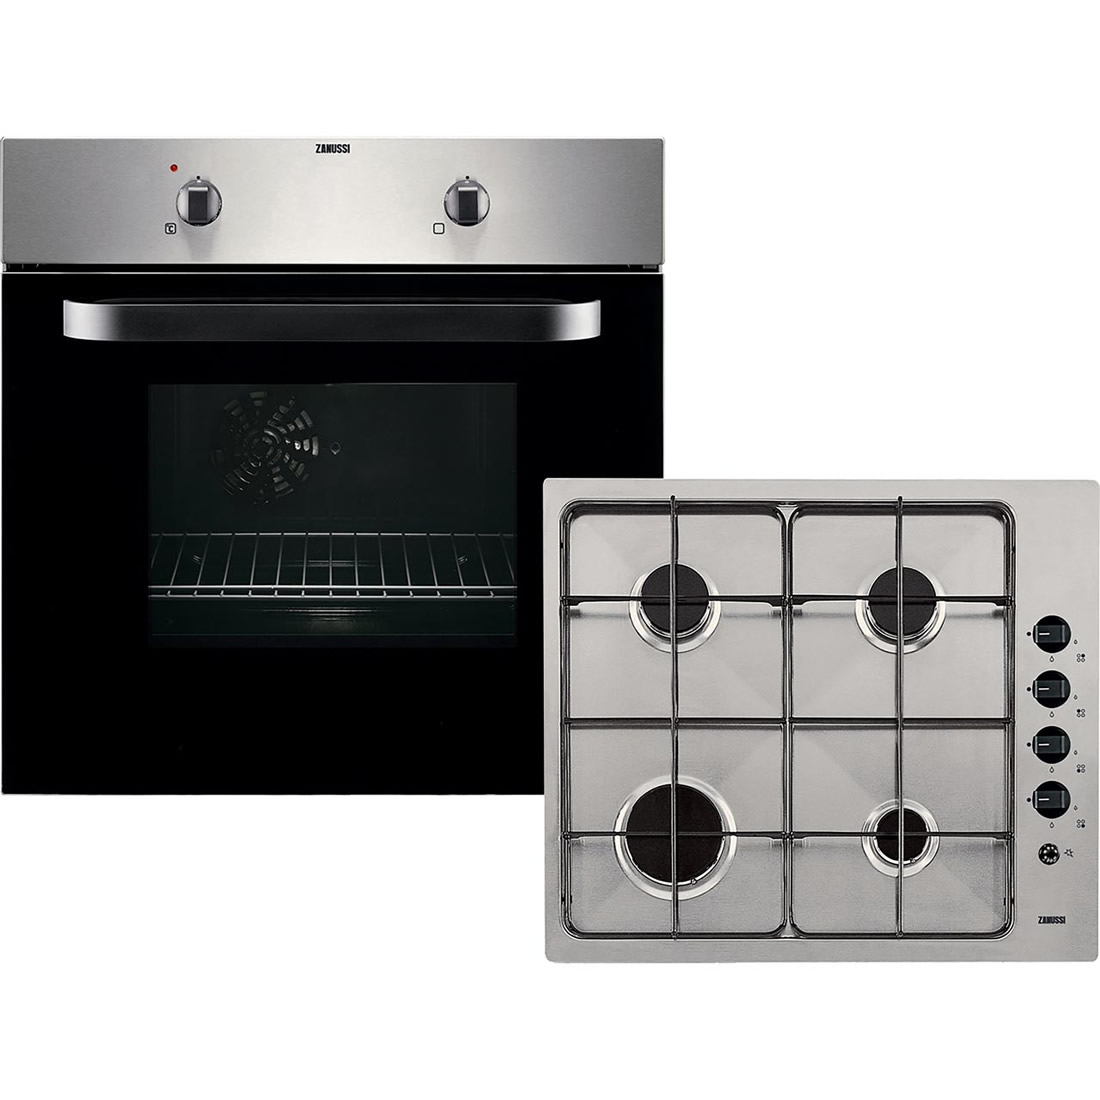 Zanussi Built-in Single Electric Oven + Gas Hob